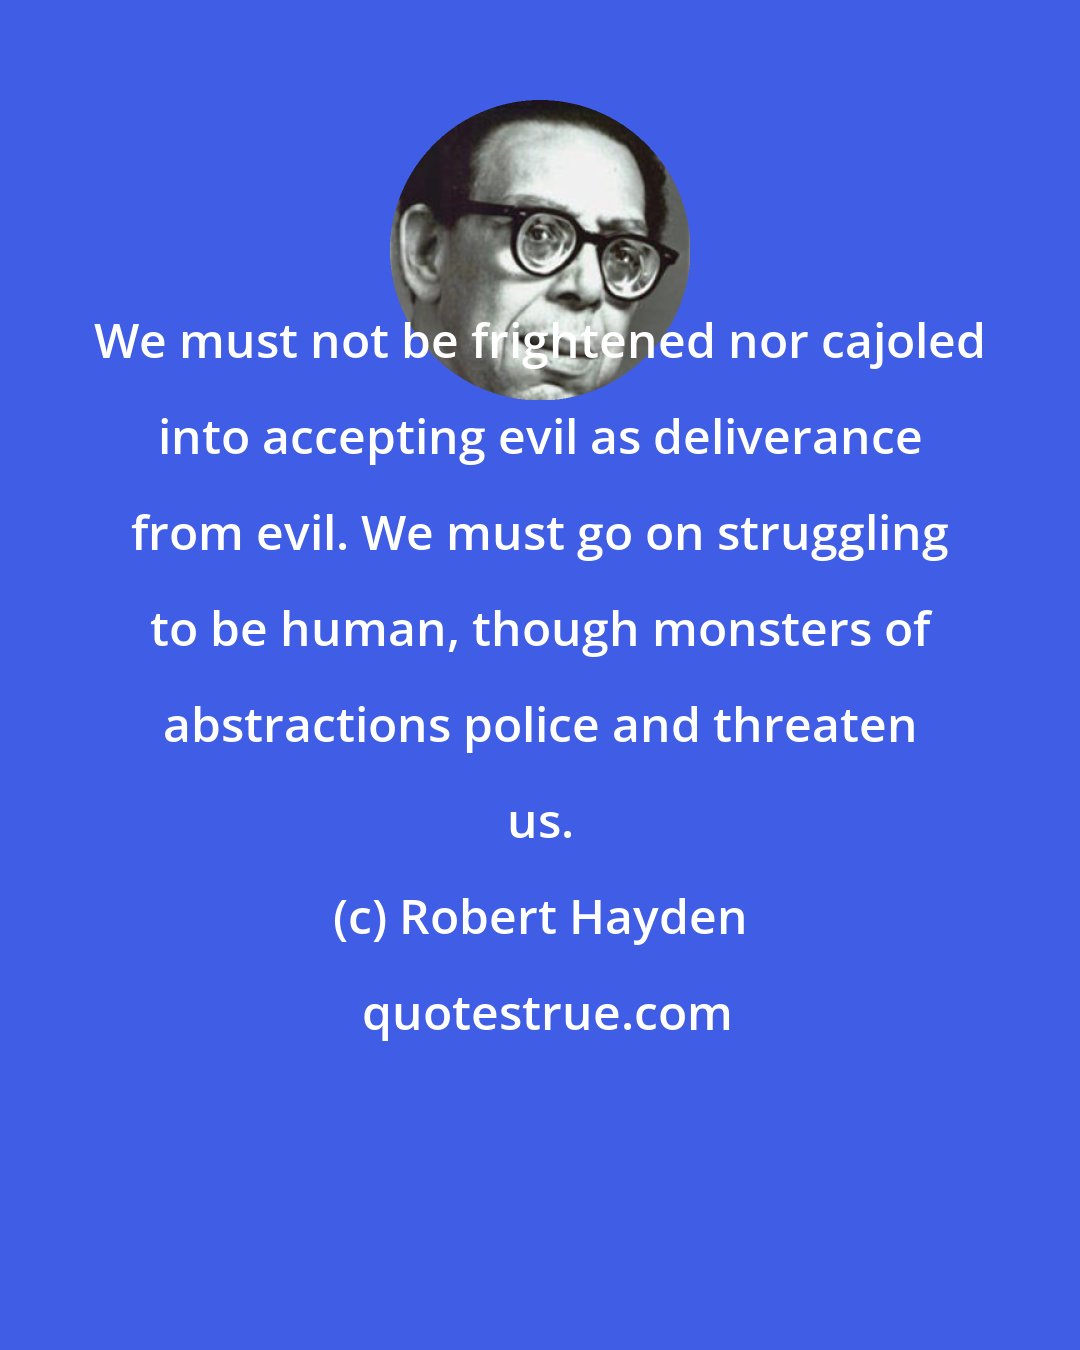 Robert Hayden: We must not be frightened nor cajoled into accepting evil as deliverance from evil. We must go on struggling to be human, though monsters of abstractions police and threaten us.